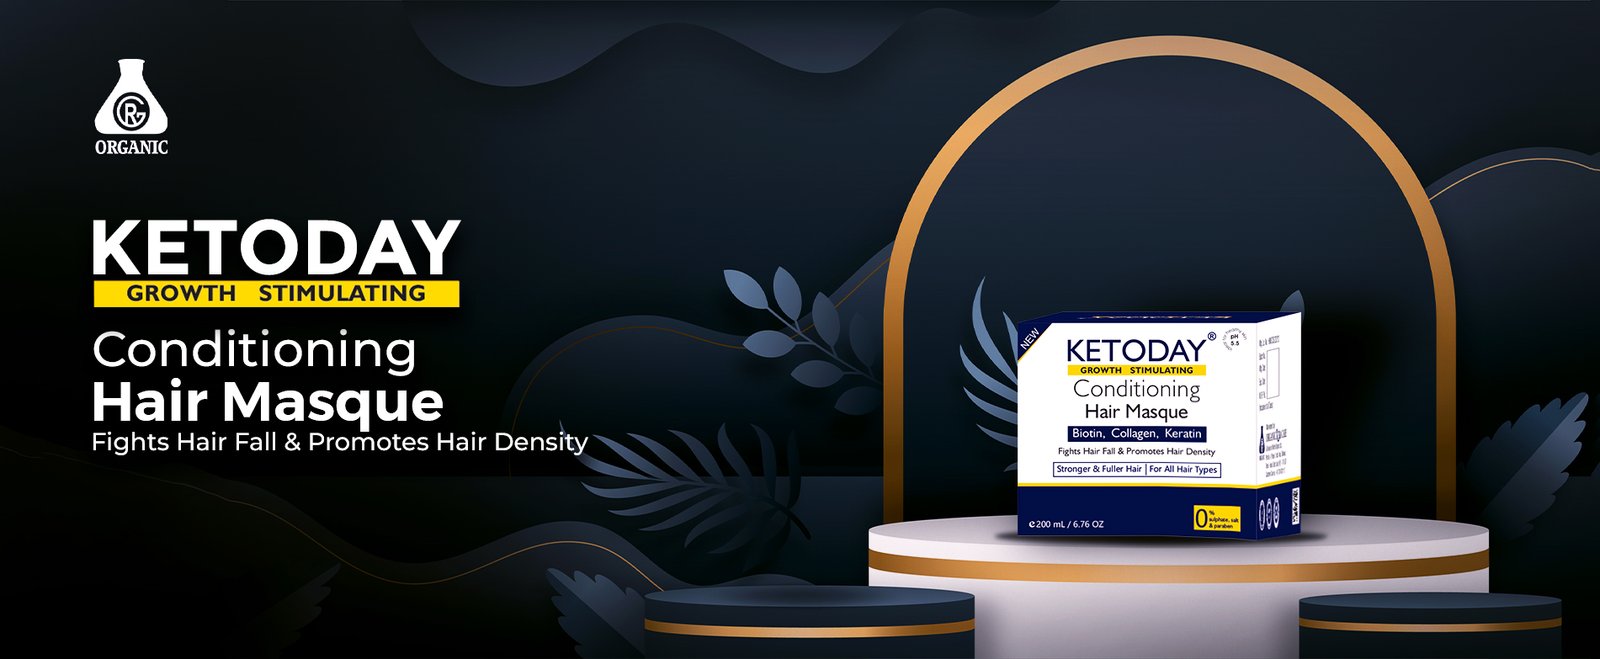 Ketoday Growth Stimulating Conditioning Hair Masque